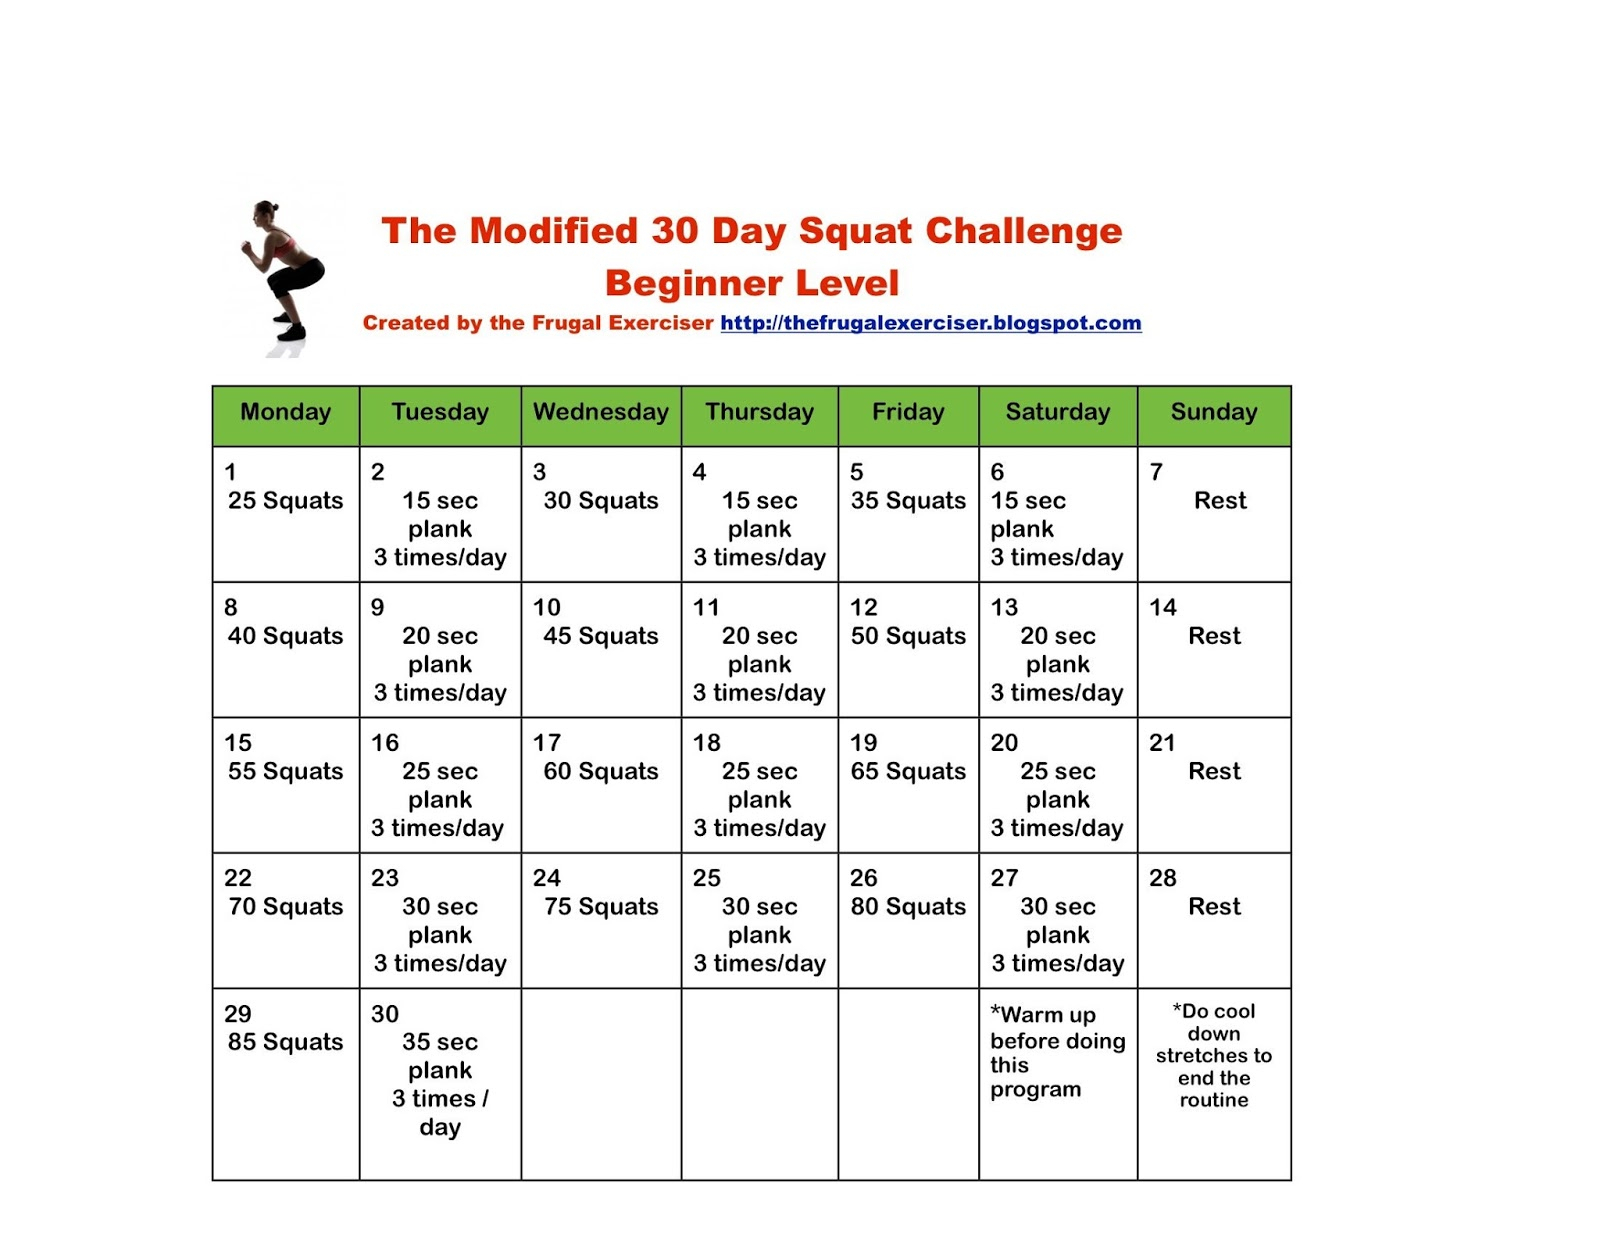 The Modified 30 Day Squat Challenge